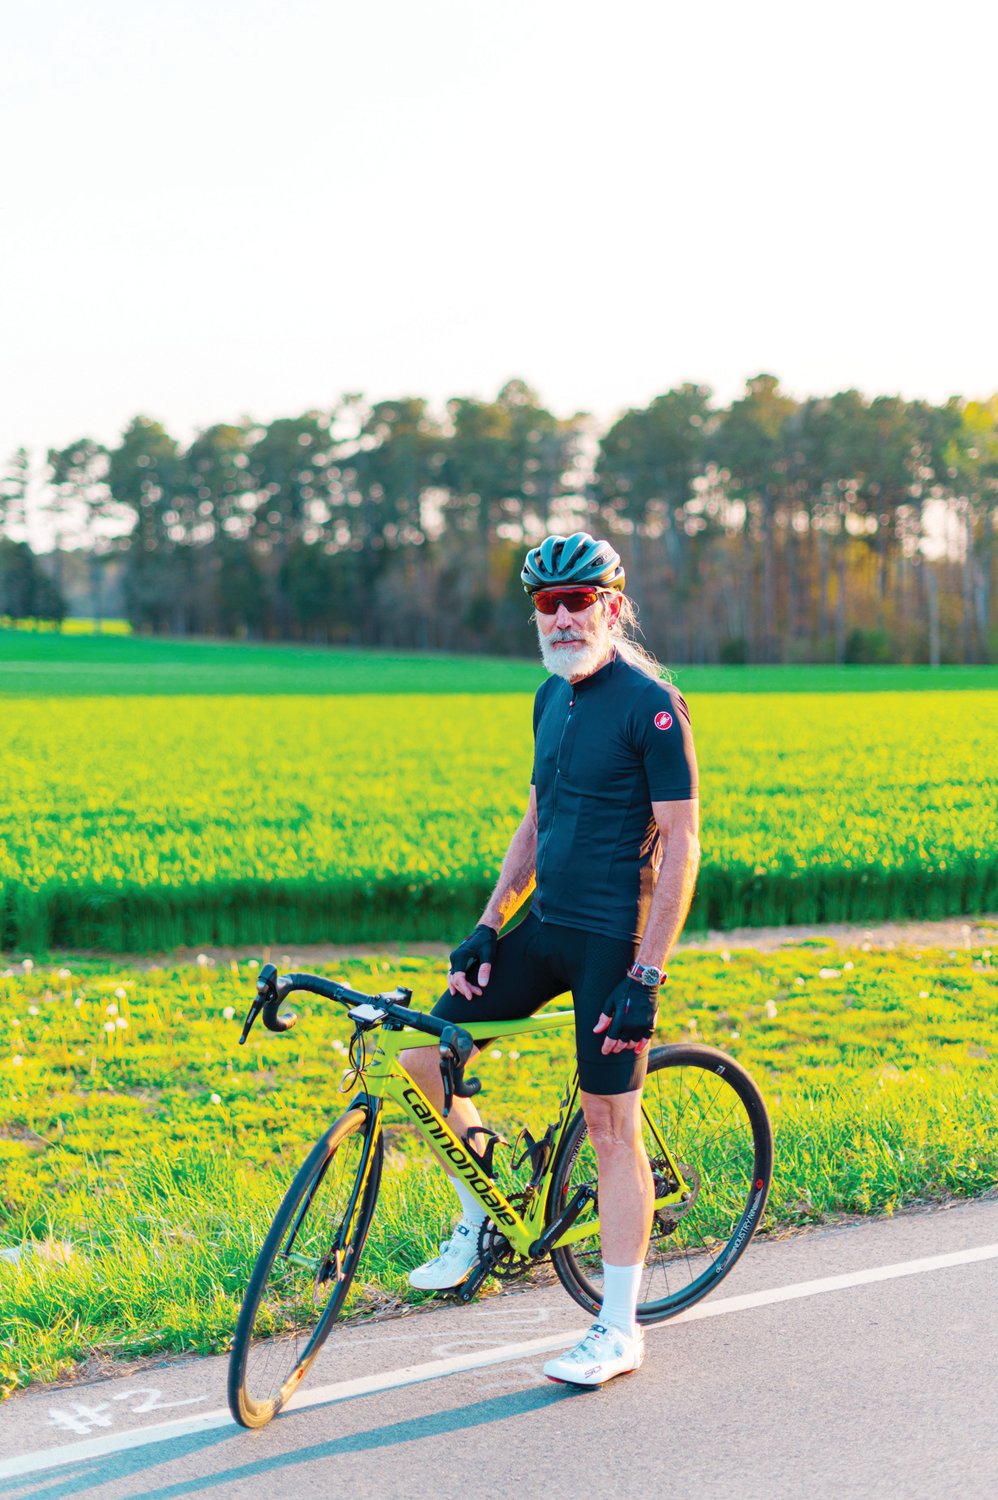 Chuck Gillis, 70, poses with his bike in front of a